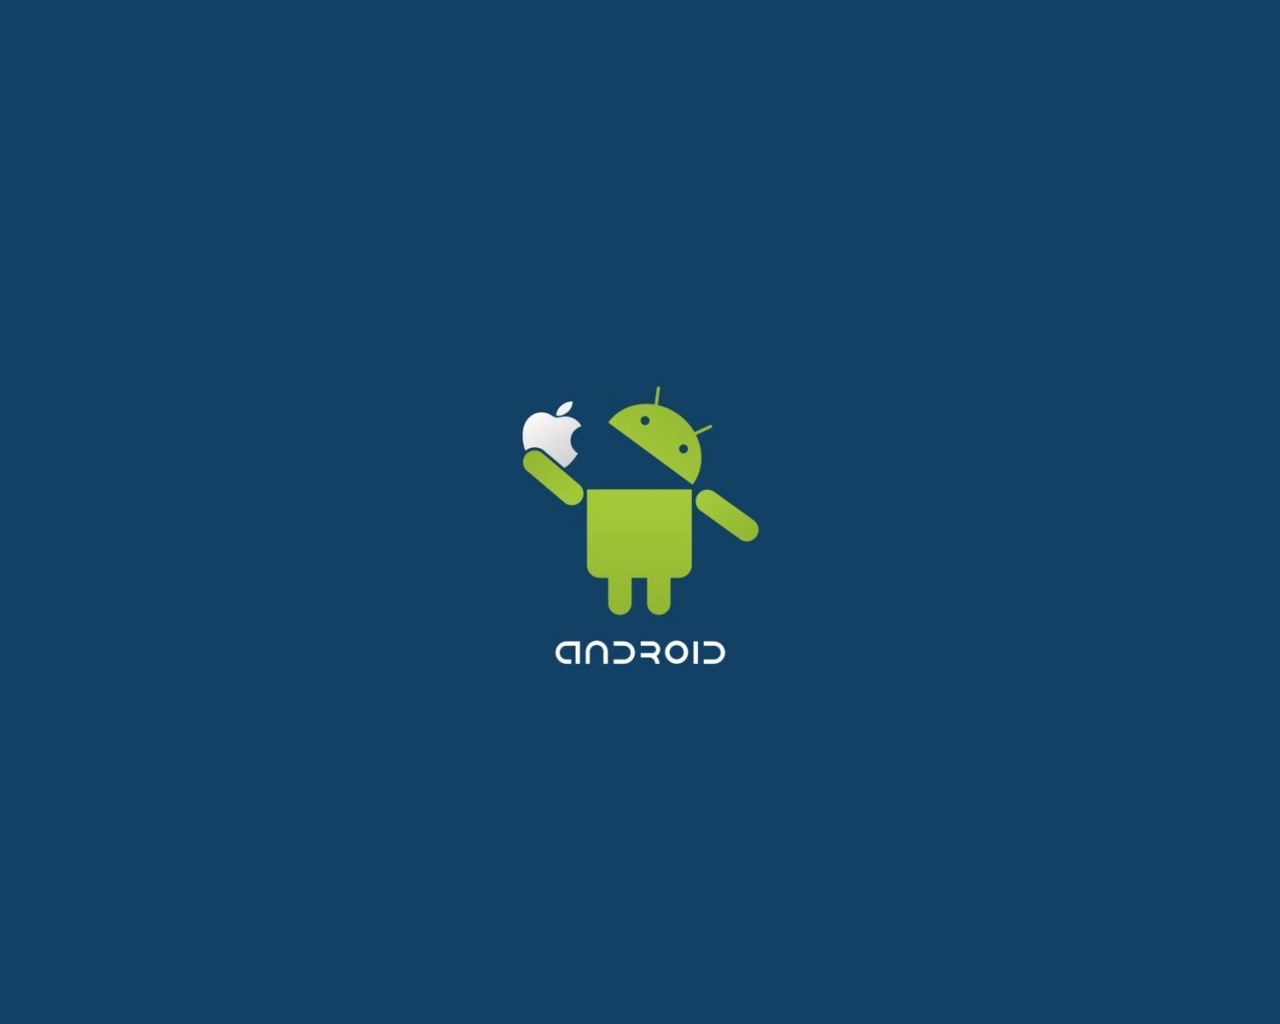 Android Eating Apple Logo HD Wallpaper Background For Mobile And Pc